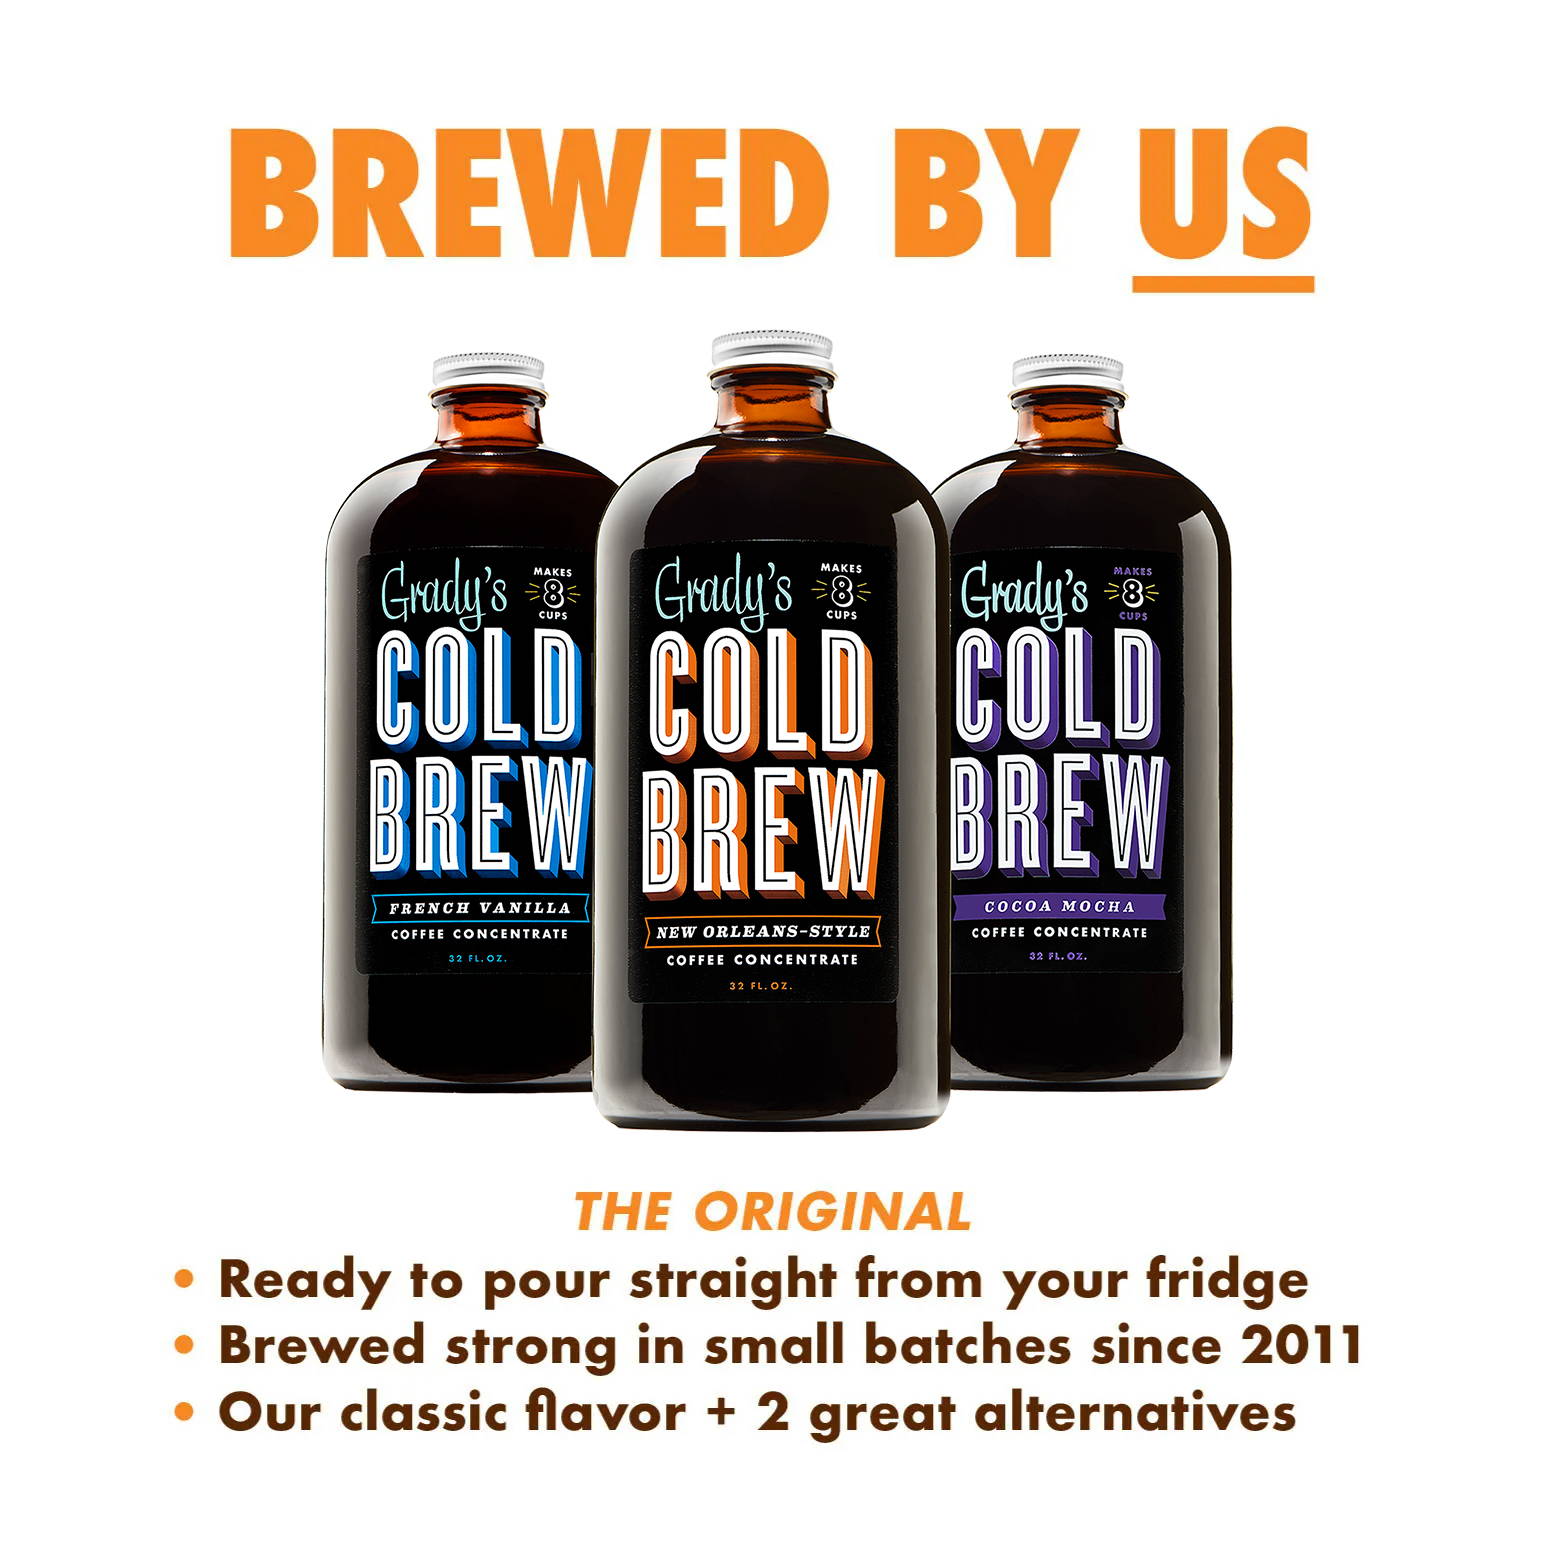 Grady's Cold Brew, brewed by us!